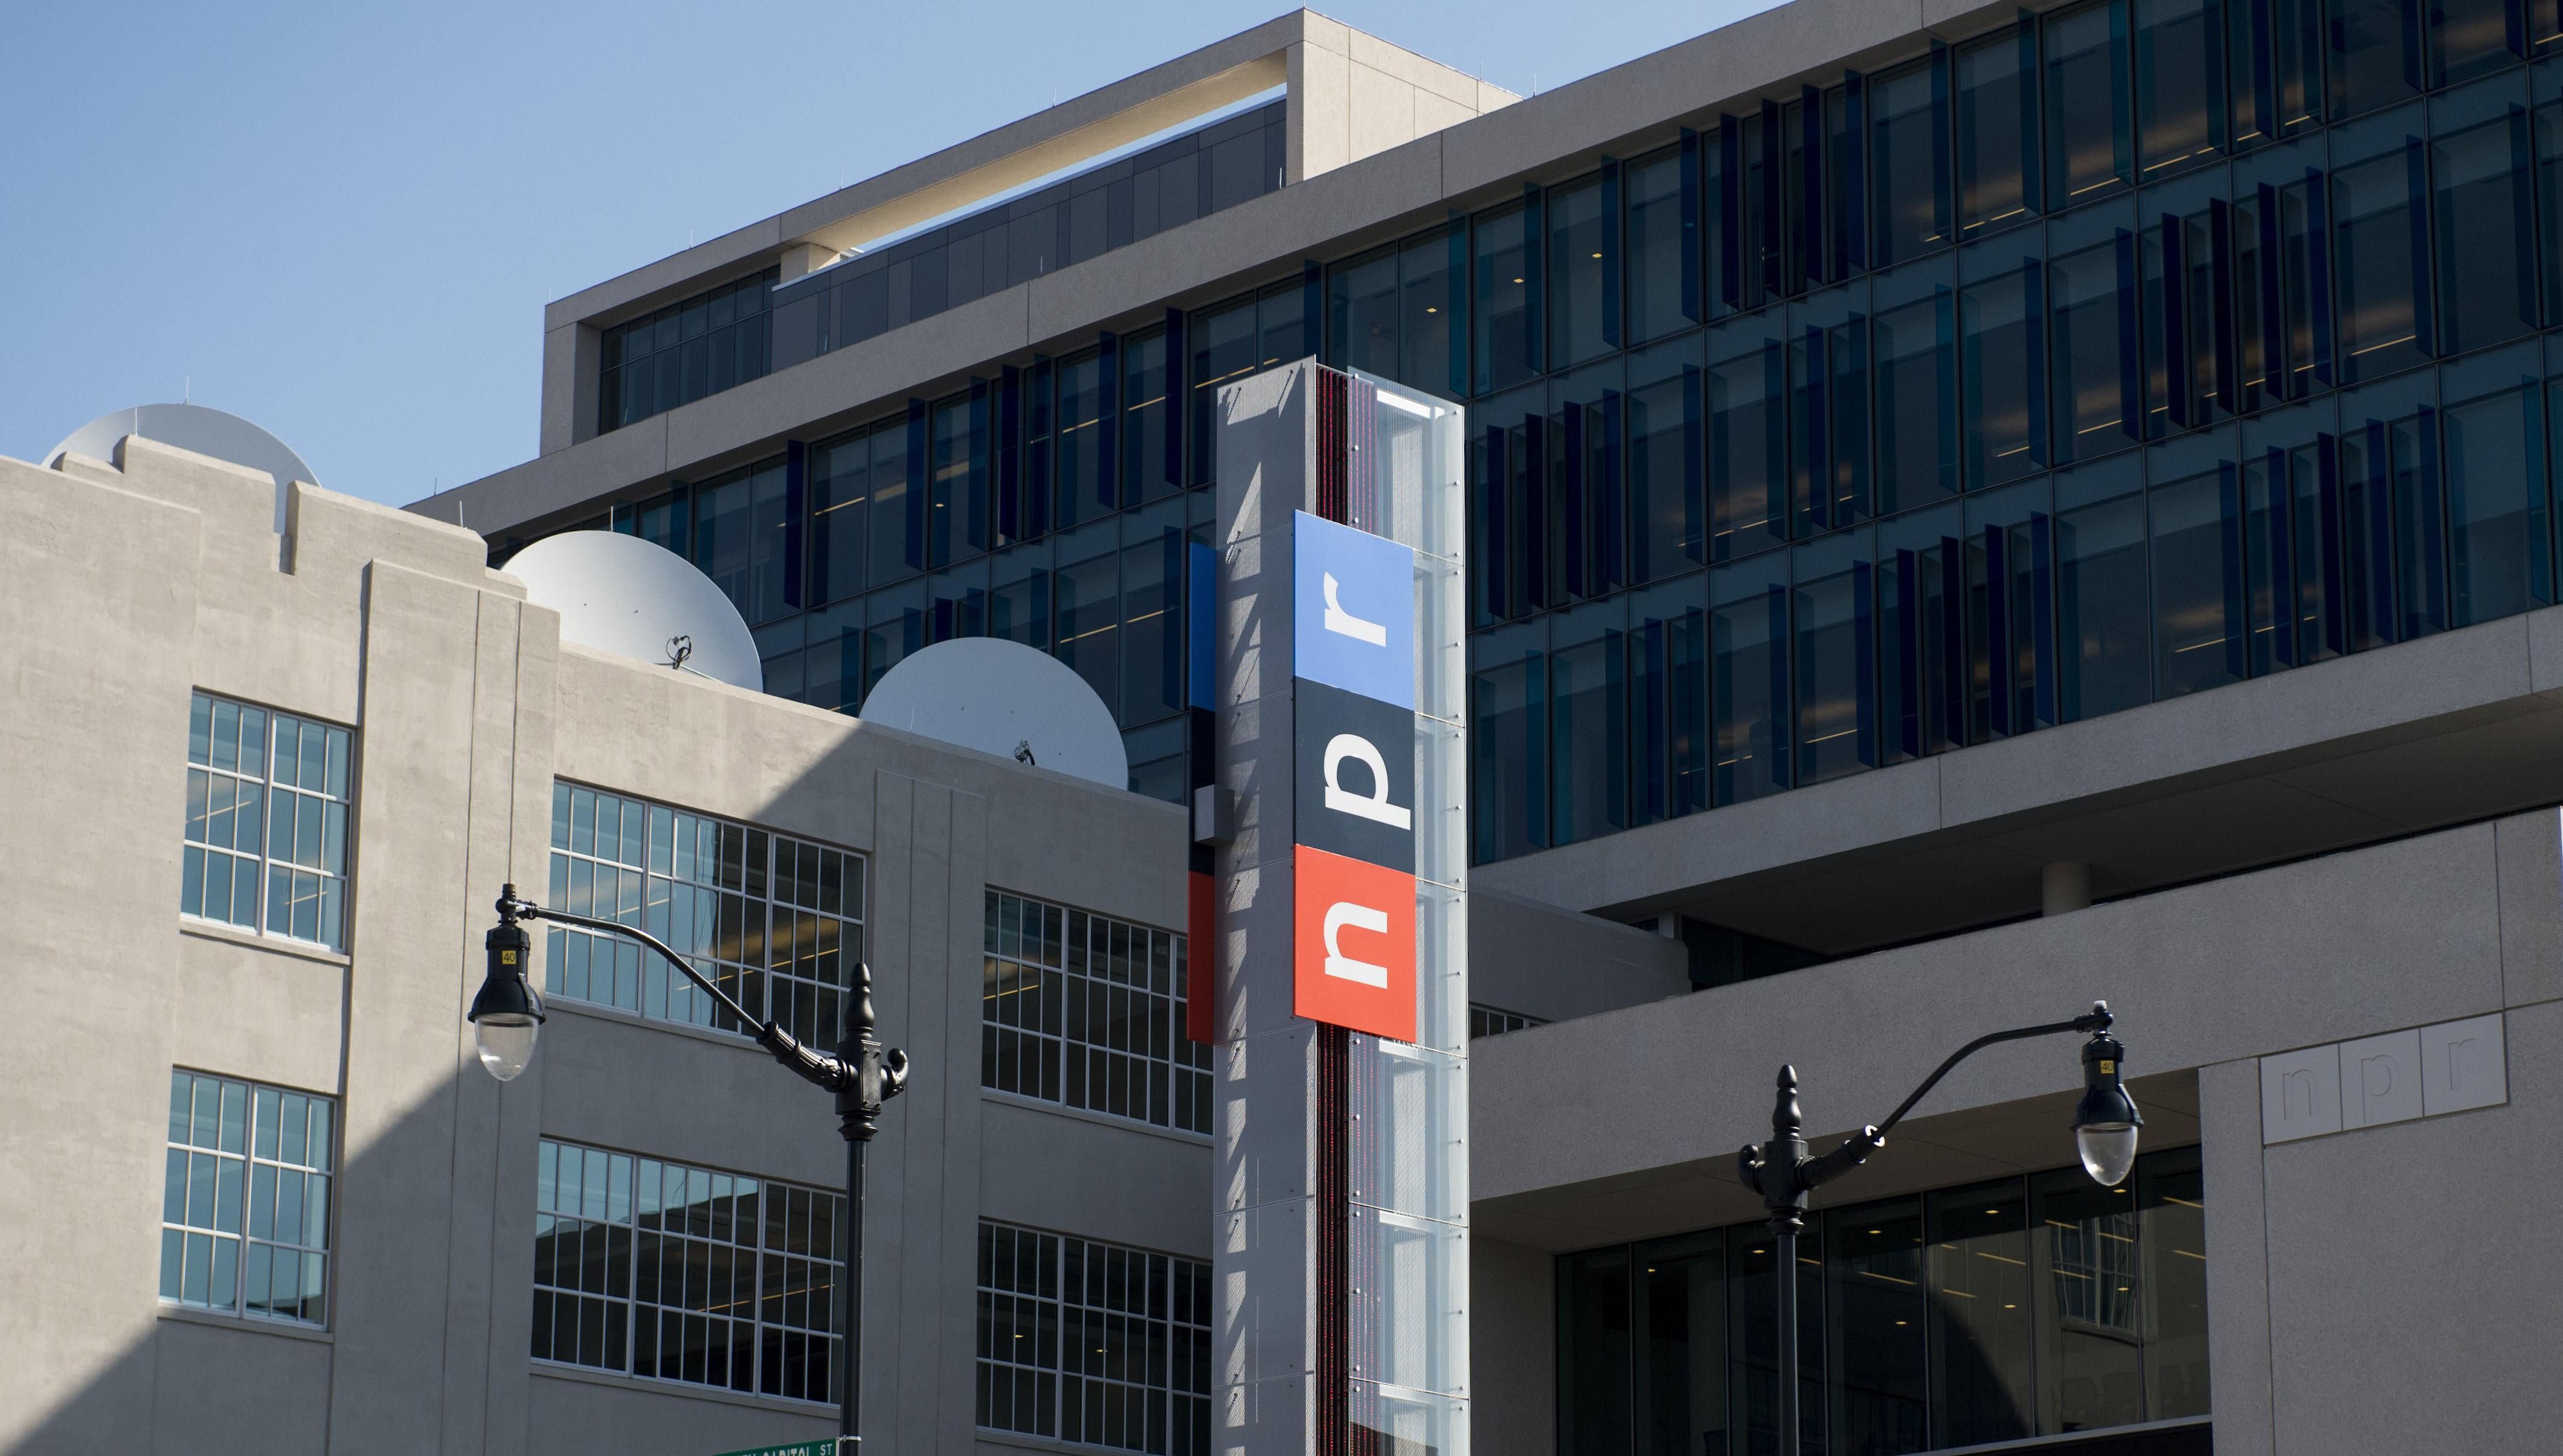  National Public Radio's new headquarters at 1111 North Capitol Street, NE opened on March 25, 2013, in the NOMA district in Washington.